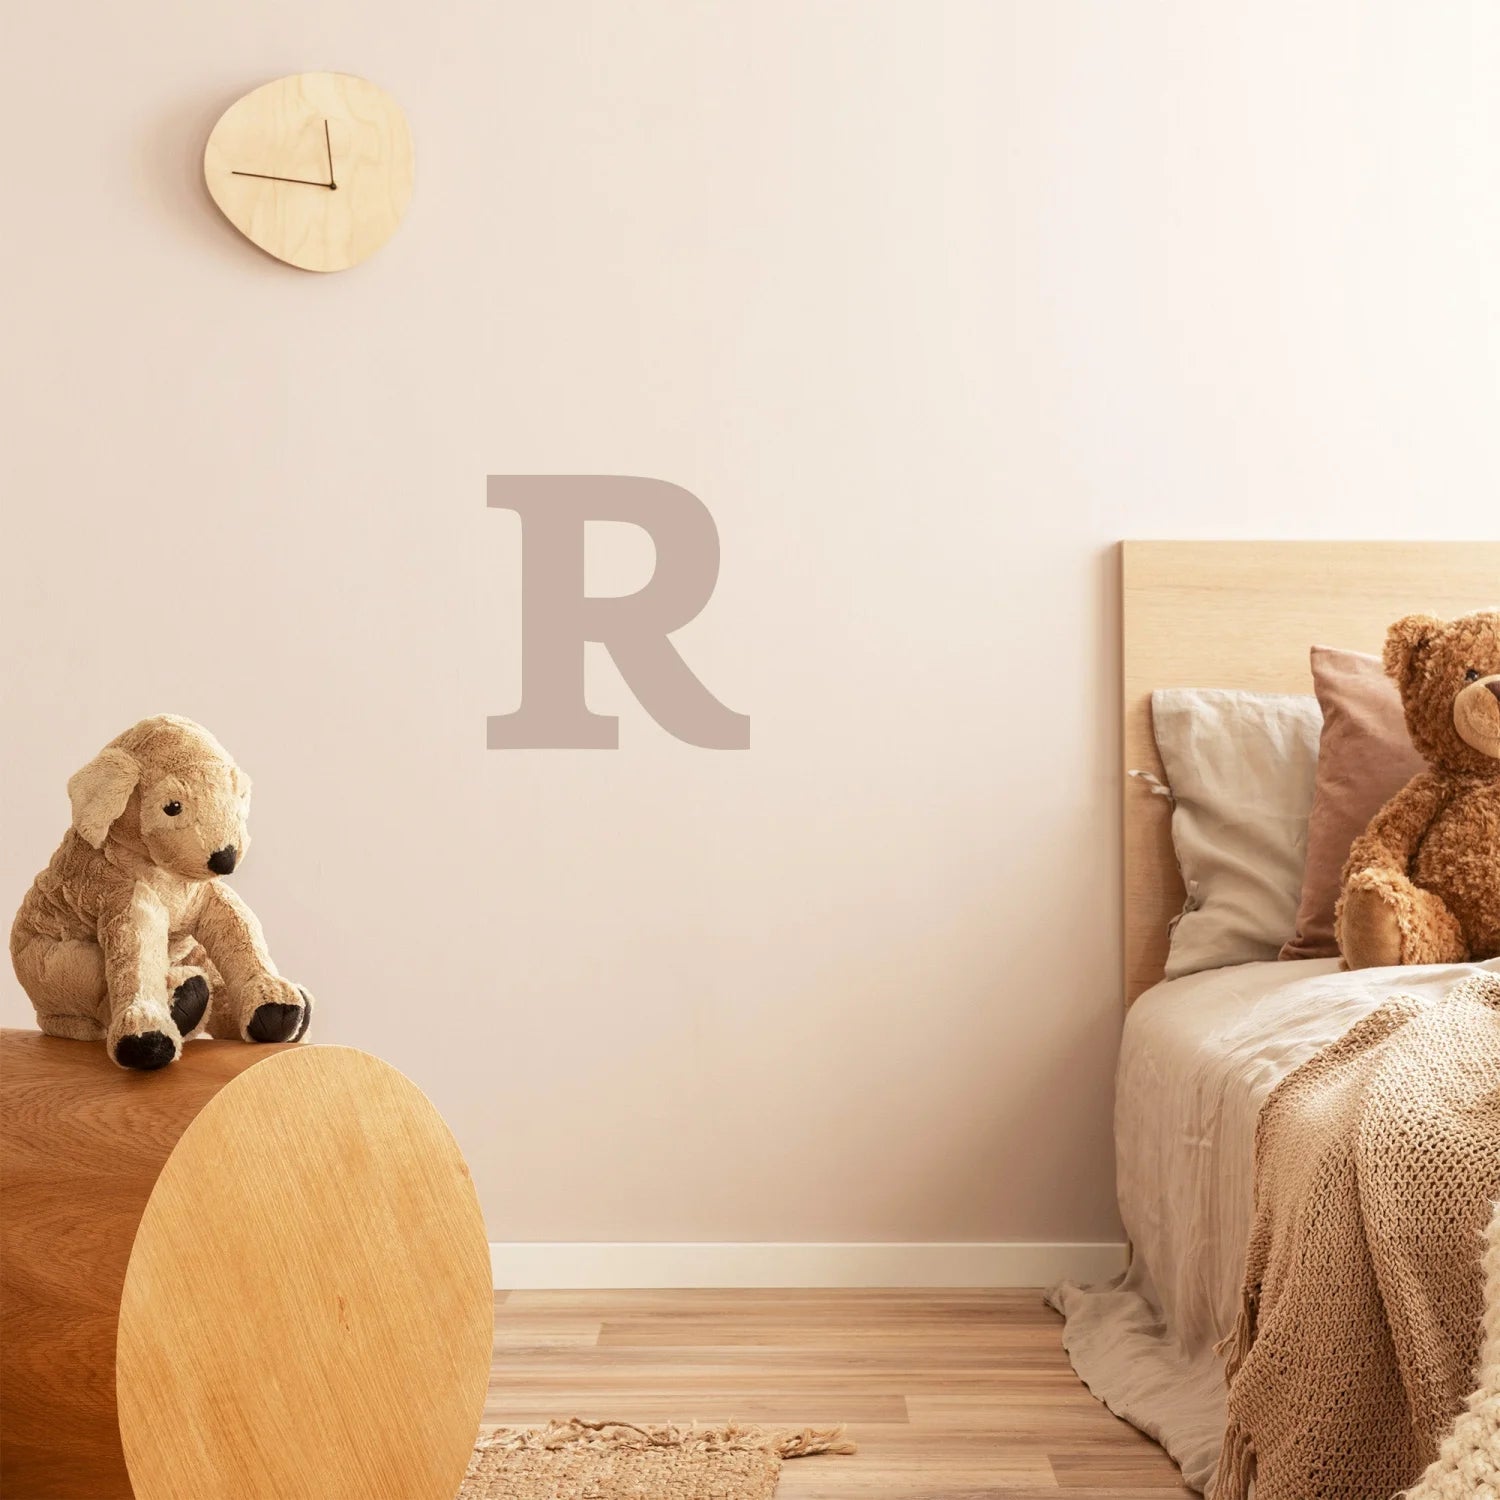 Letter R Monogram Decal - Decals Personalisation